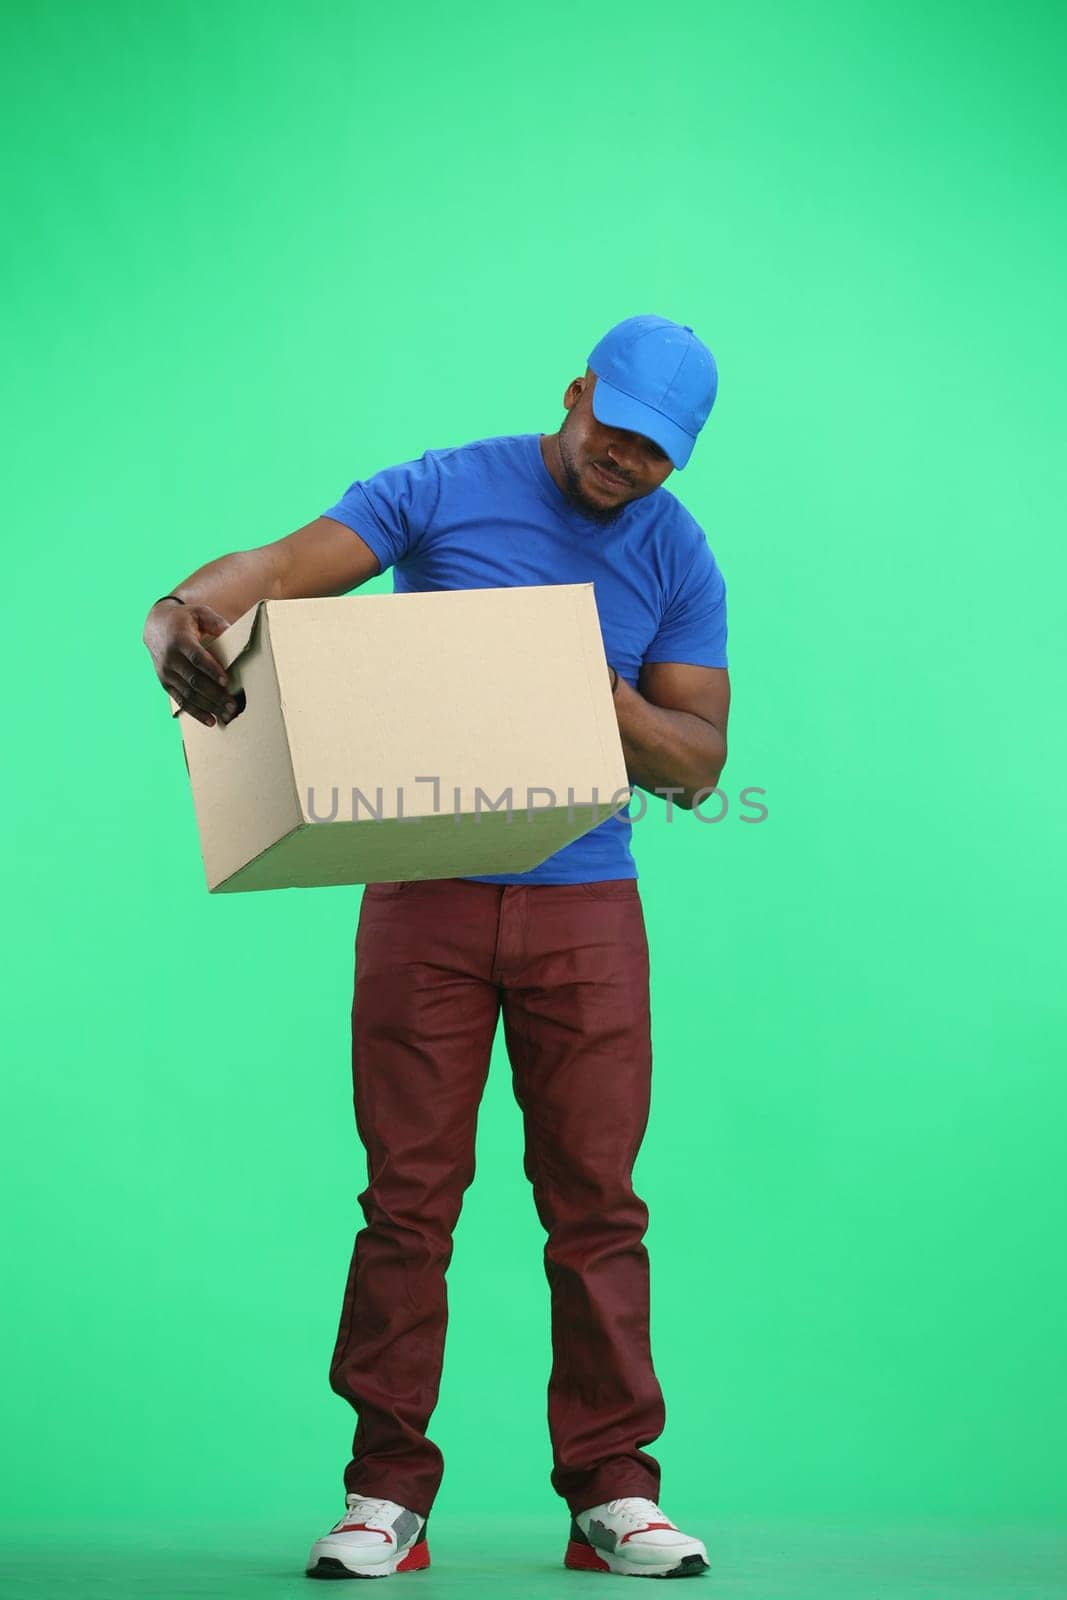 The deliveryman, in full height, on a green background, looks at the box.